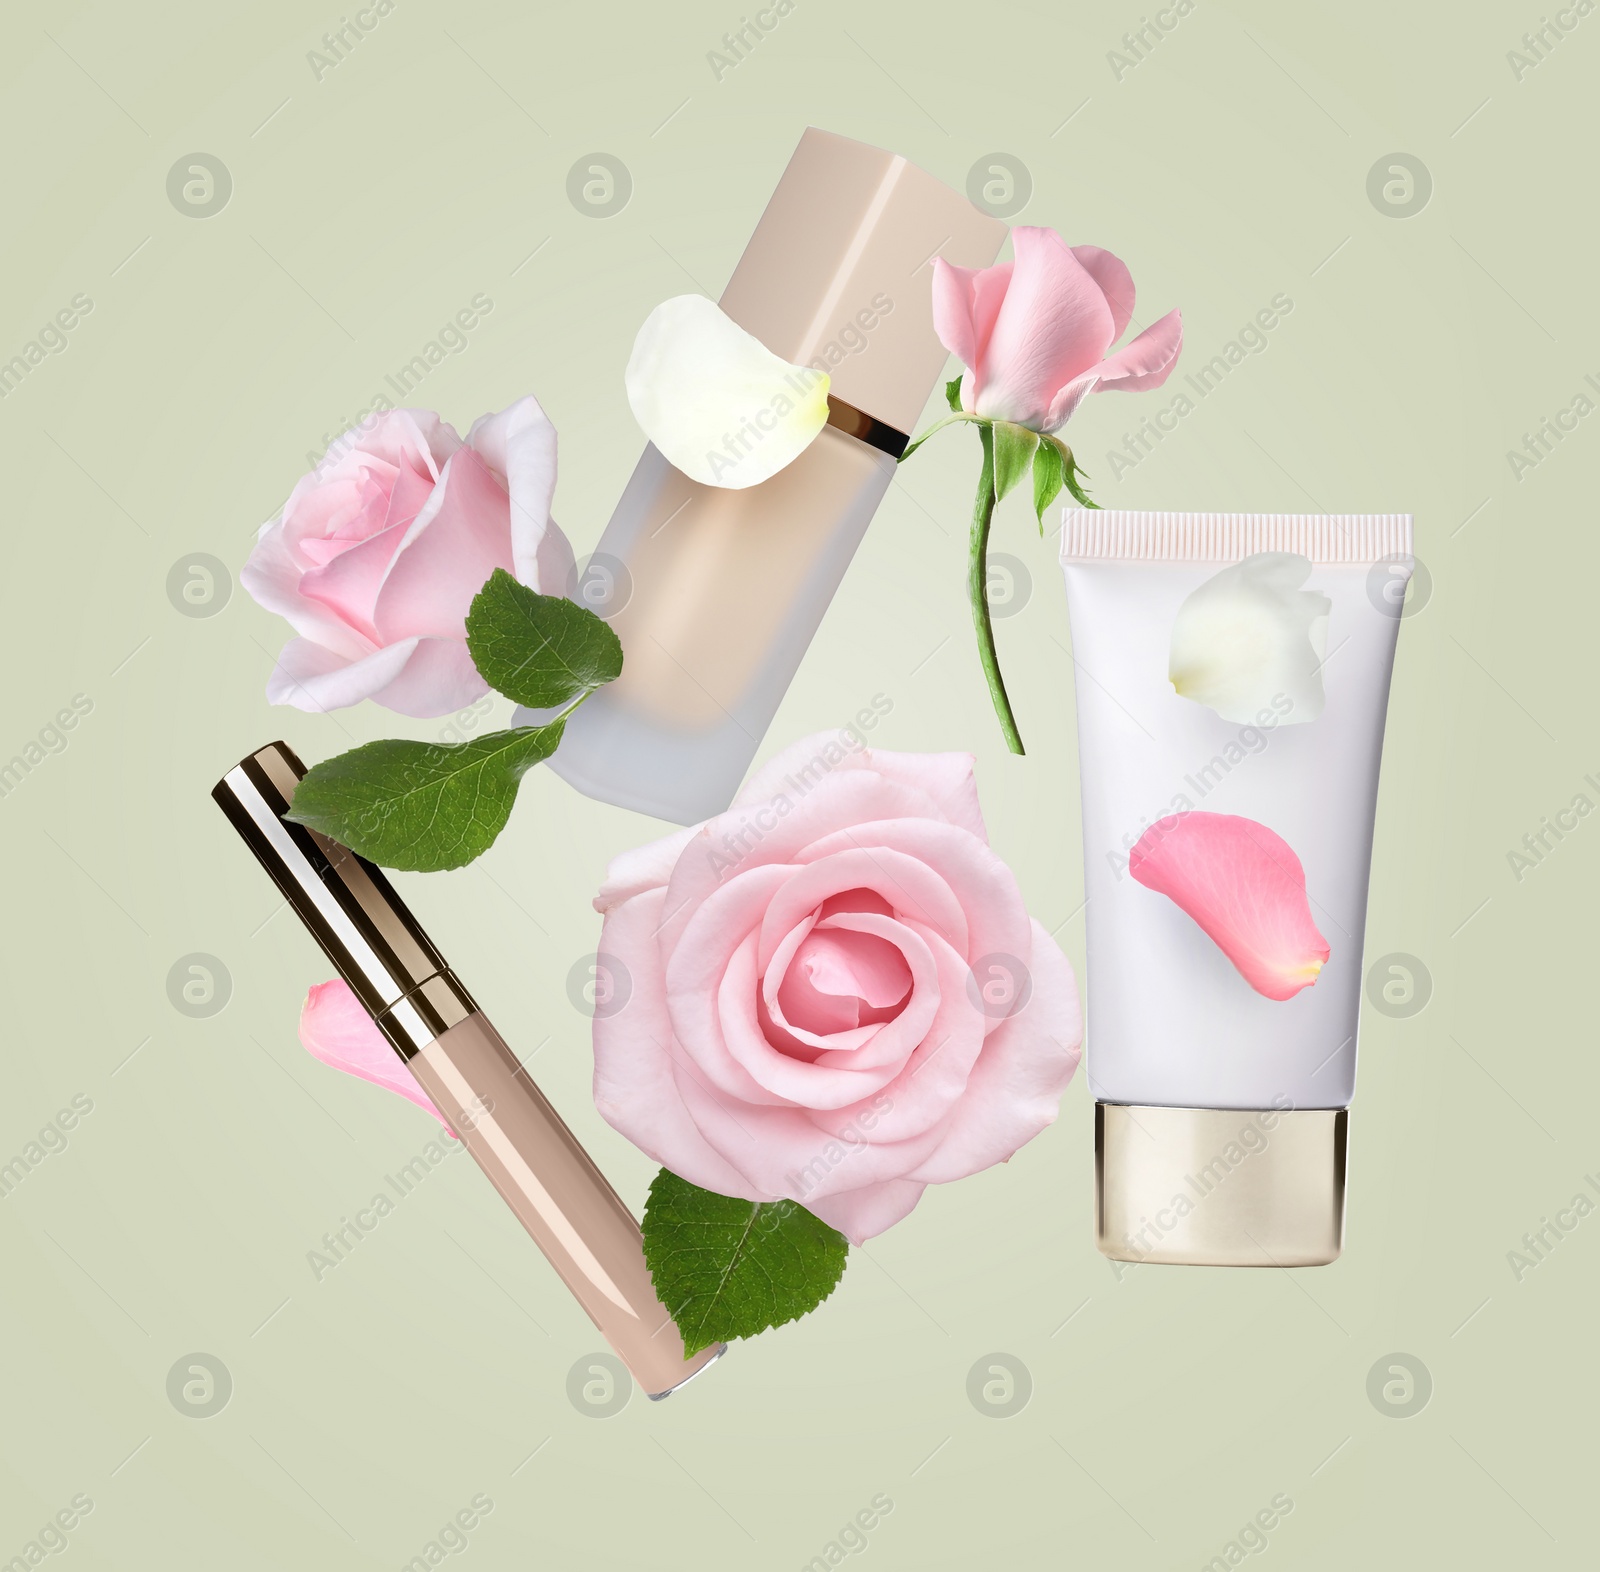 Image of Different makeup products and beautiful roses in air on light green background